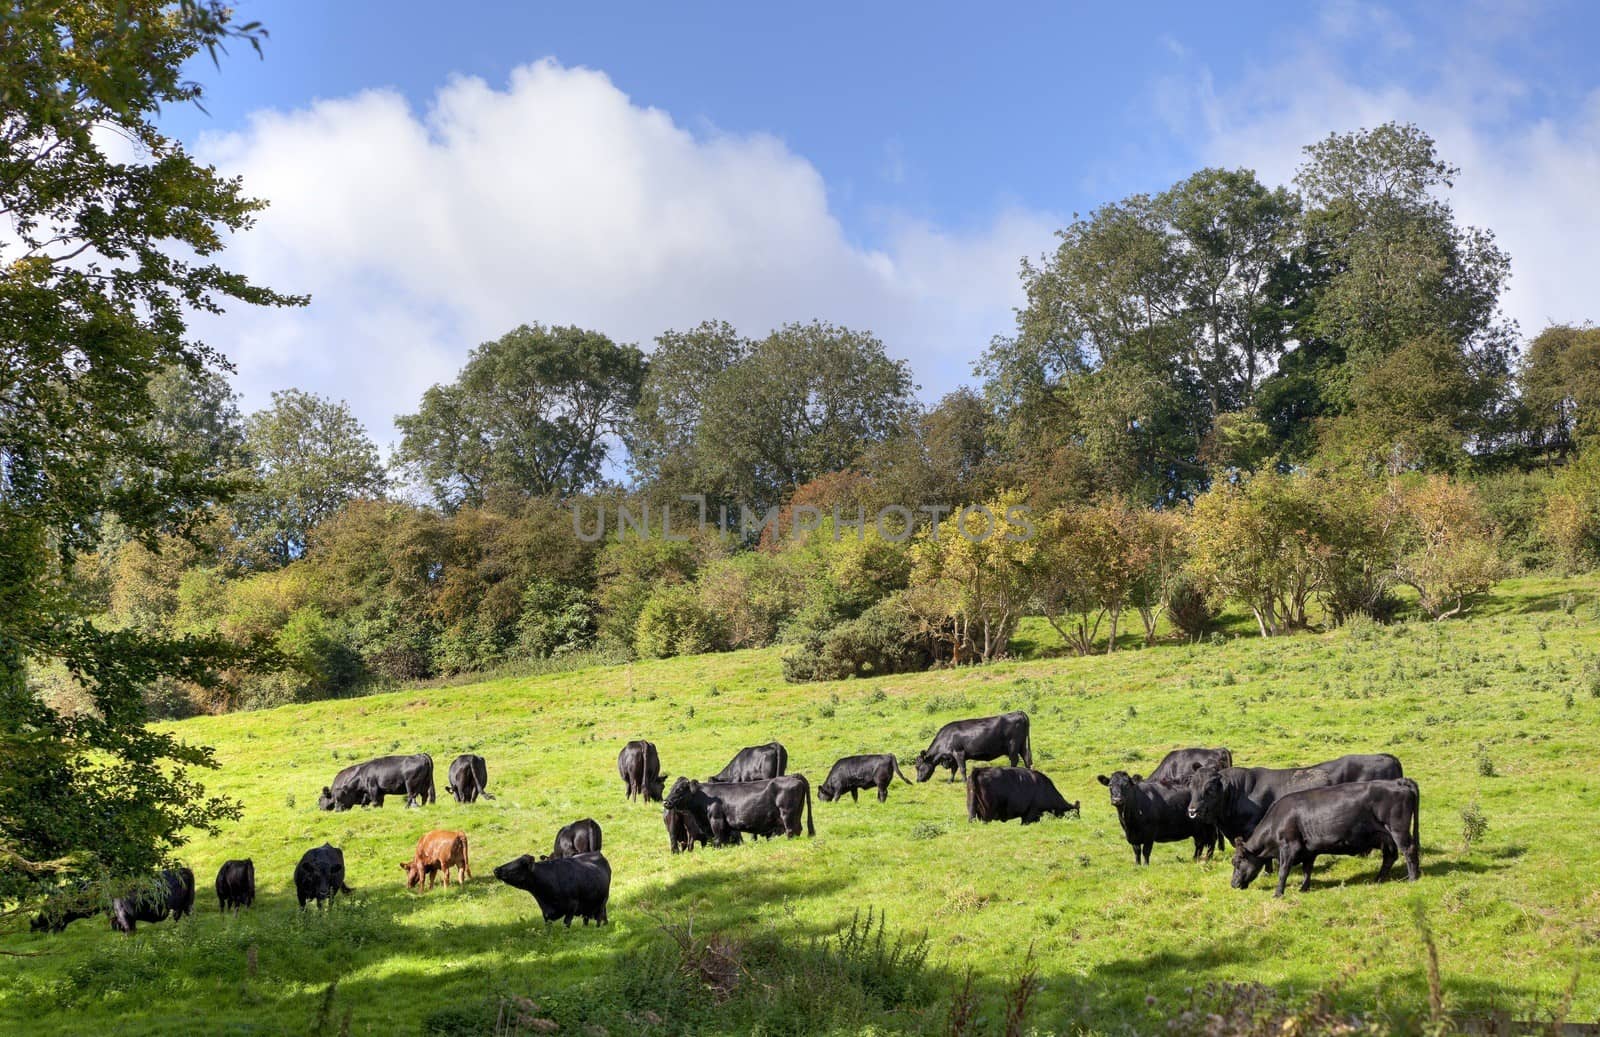 Black cows grazing near the Cotswold village of Compton Scorpion, Gloucestershire, England.